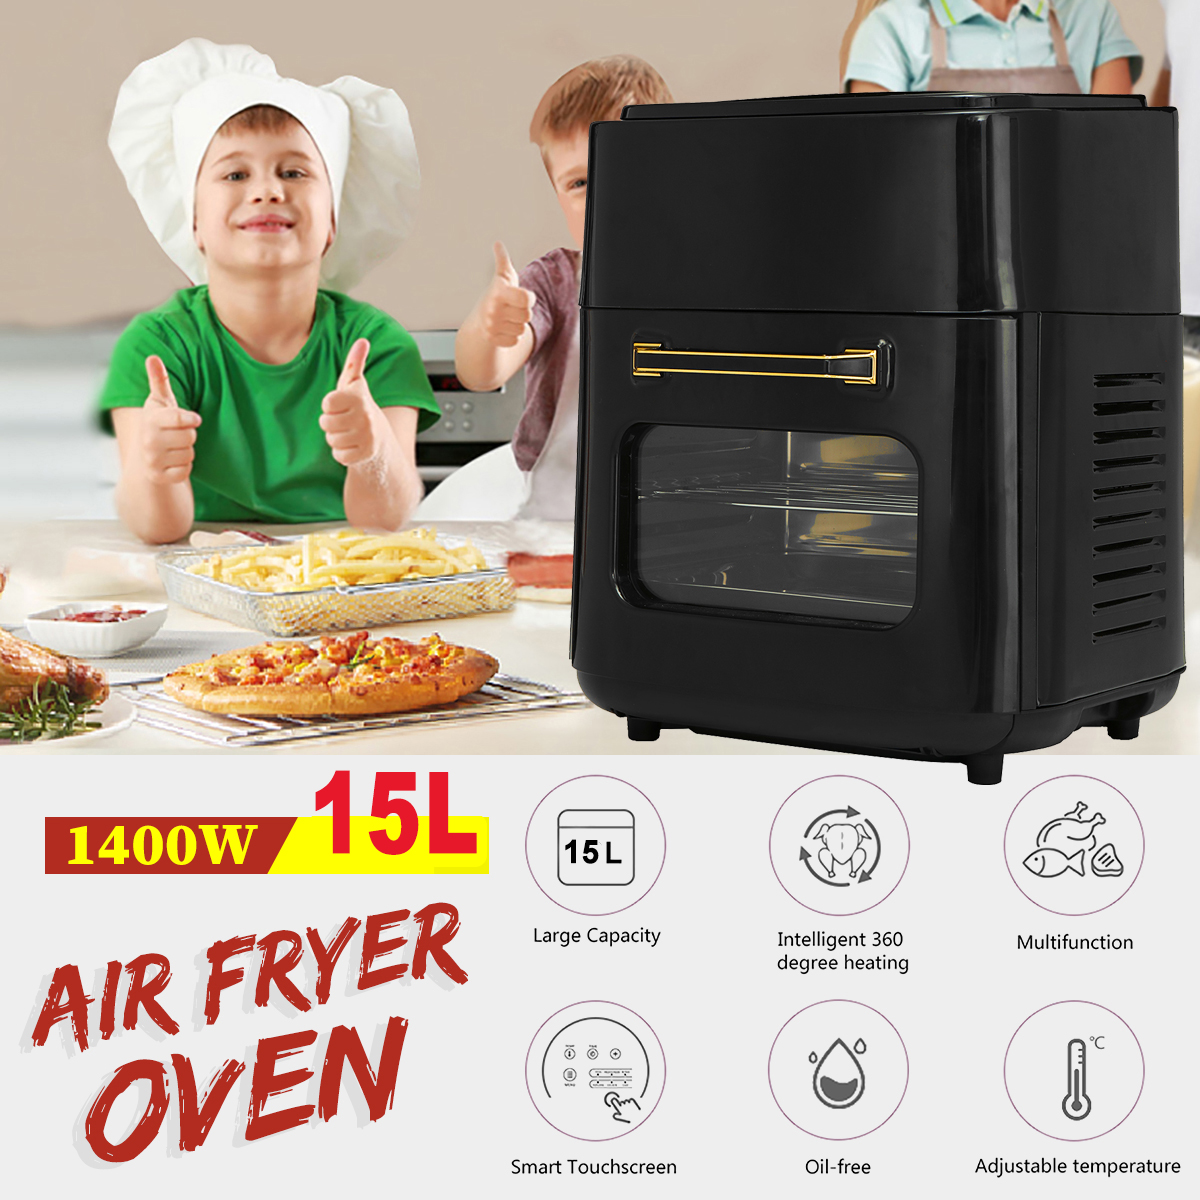 AF5-1400W-220V-15L-Air-Fryer-360deg-Surround-Heating-Digital-LCD-Display-Hot-Oven-Cooker-with-Remova-1925368-2